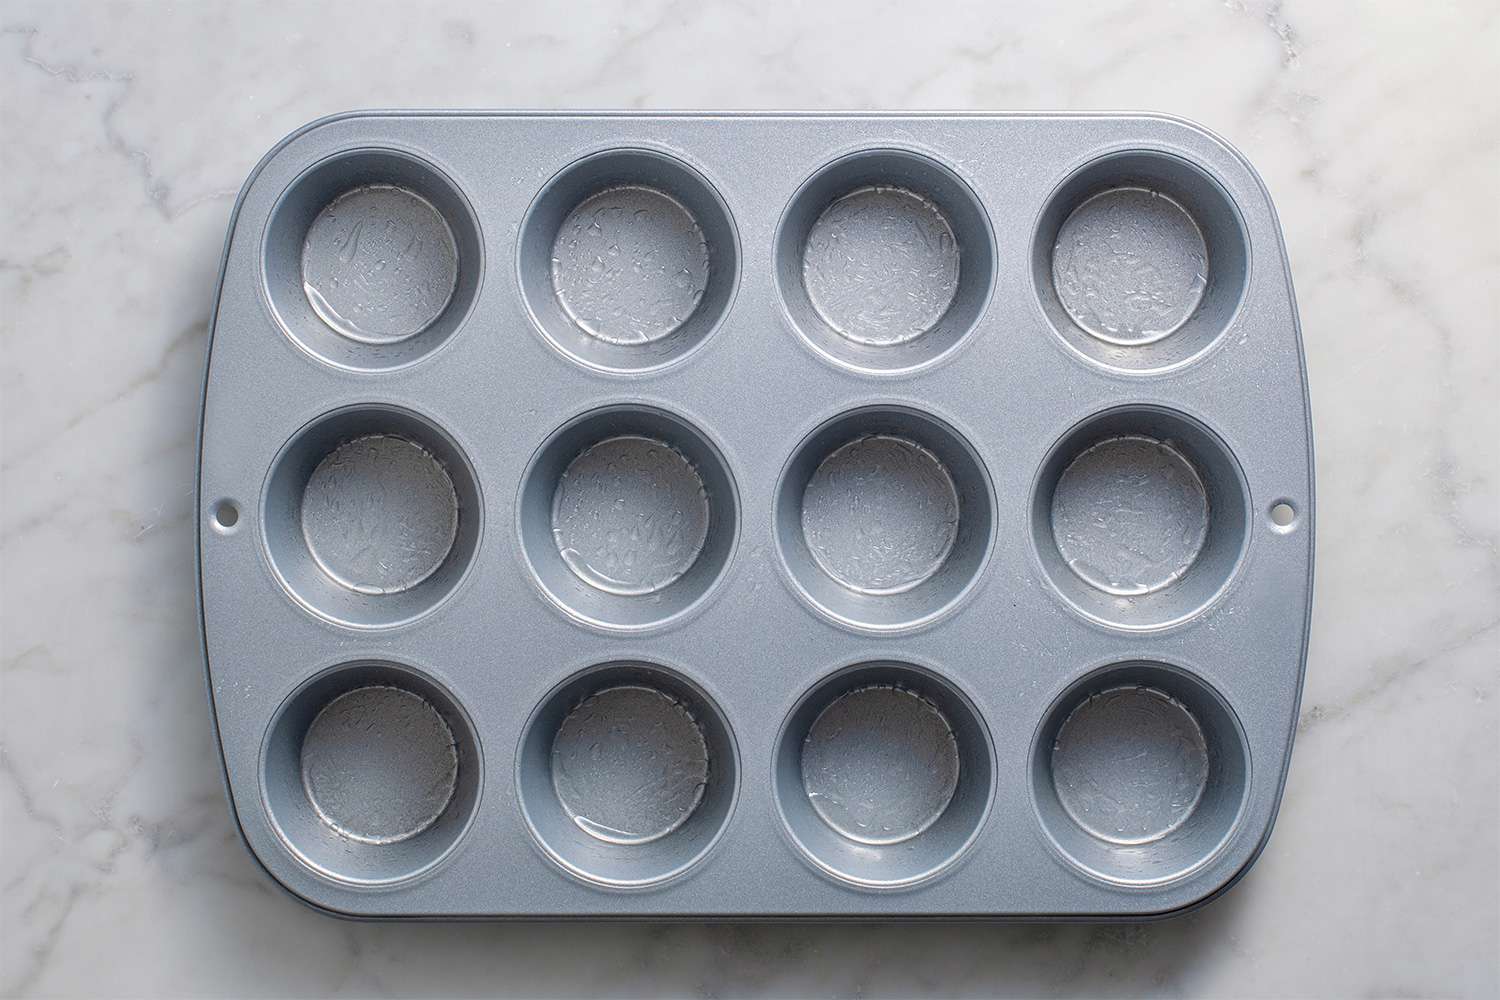 Muffin tin greased with nonstick spray